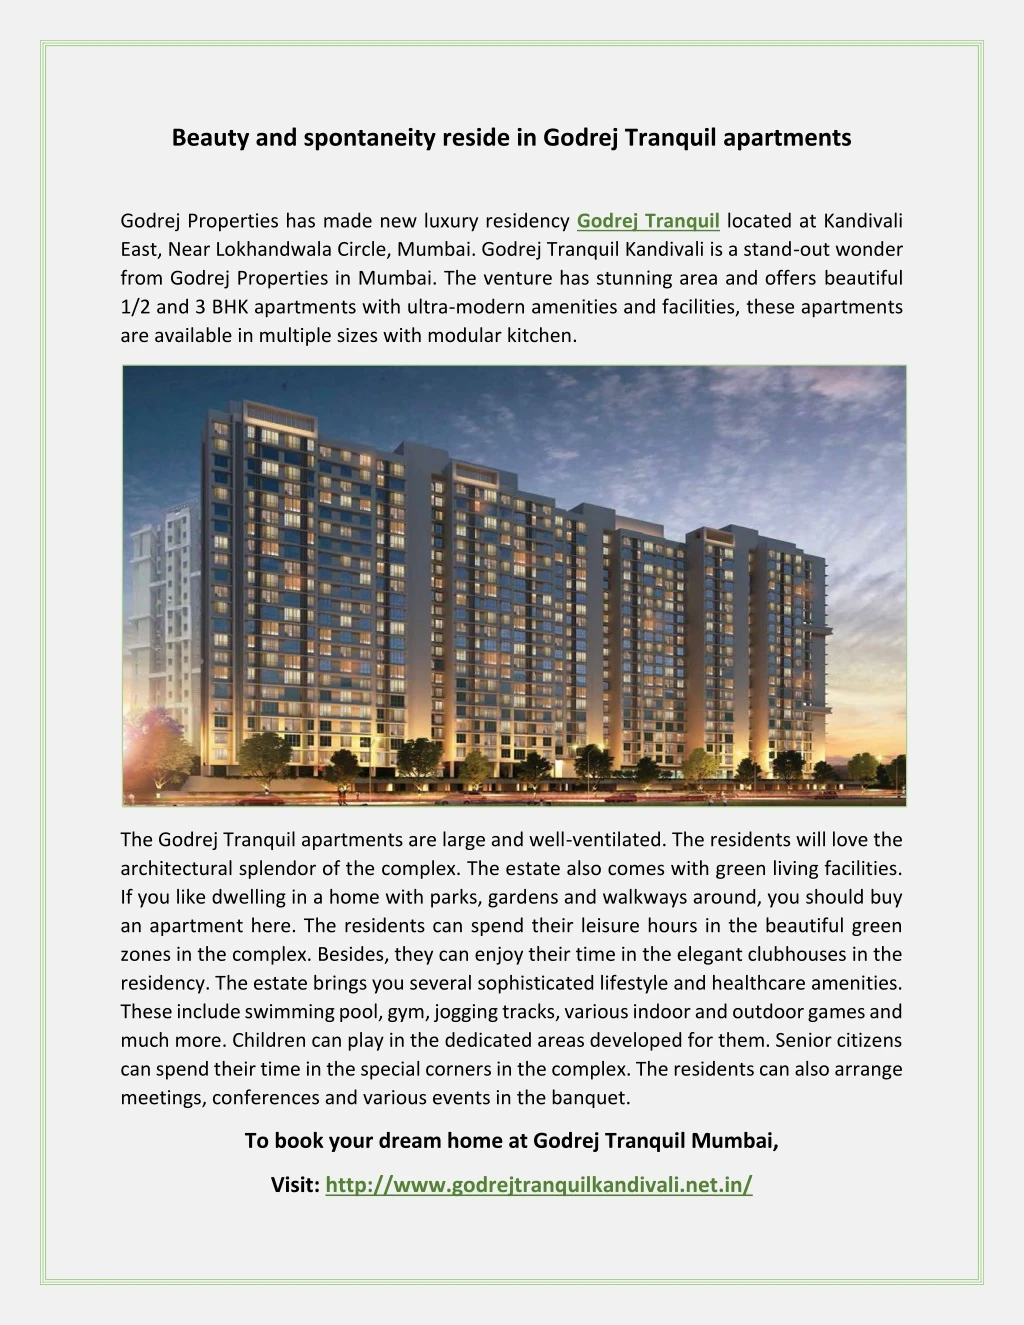 beauty and spontaneity reside in godrej tranquil